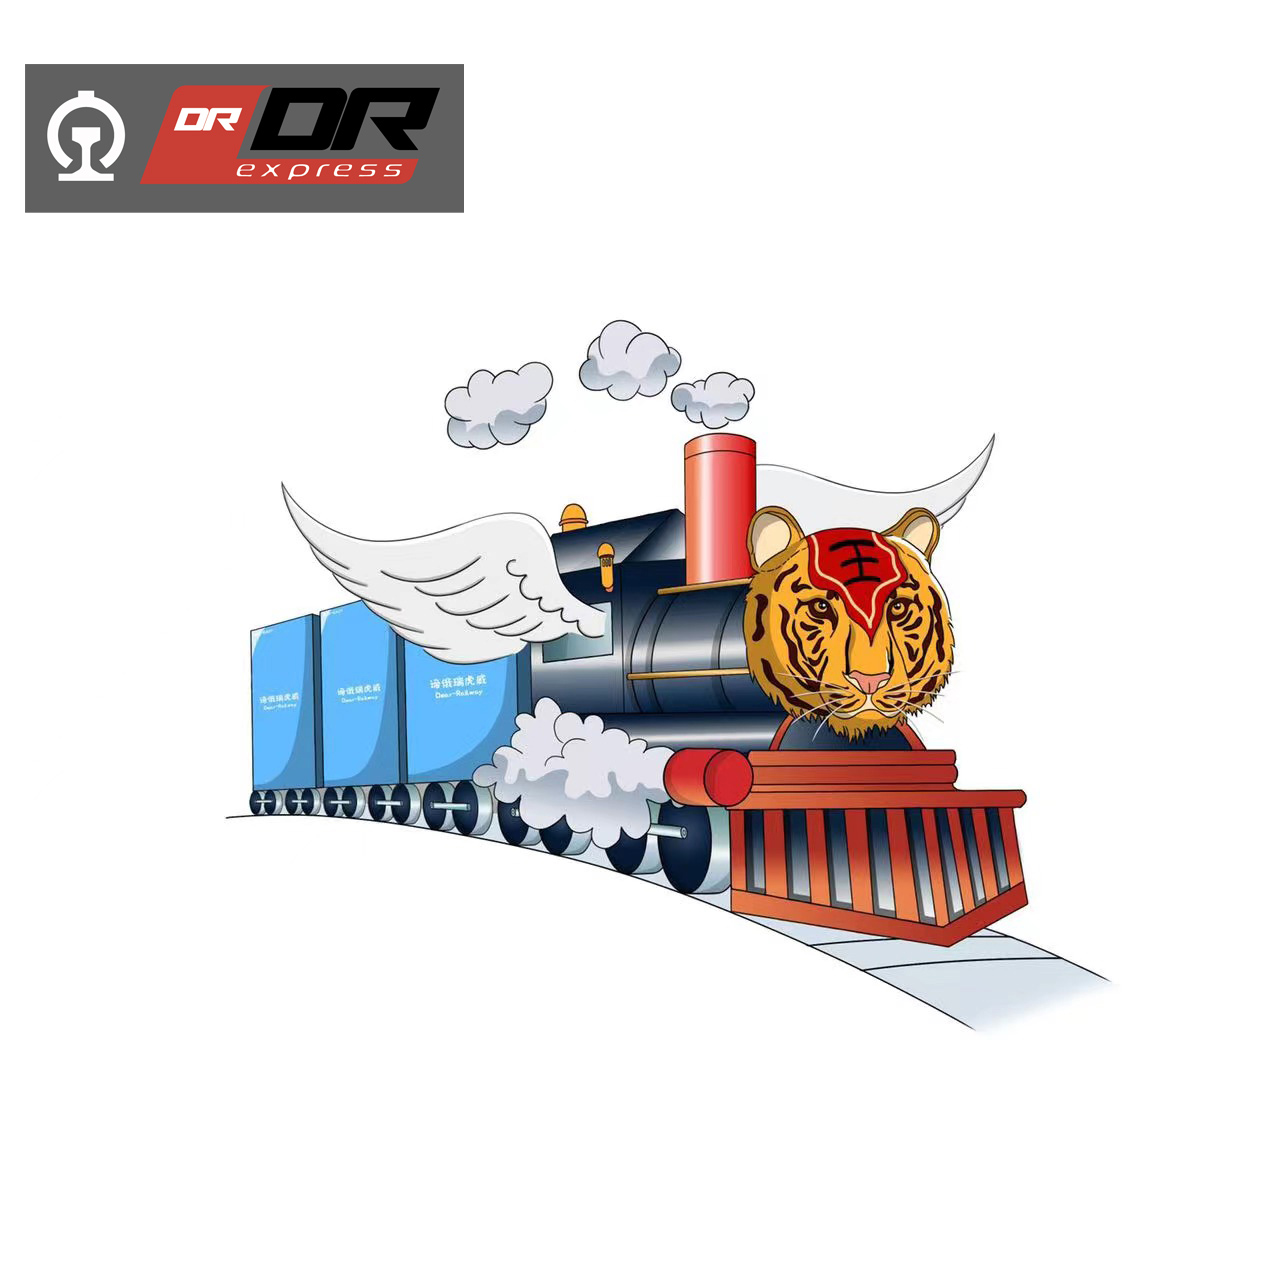 Railway from China to Russia